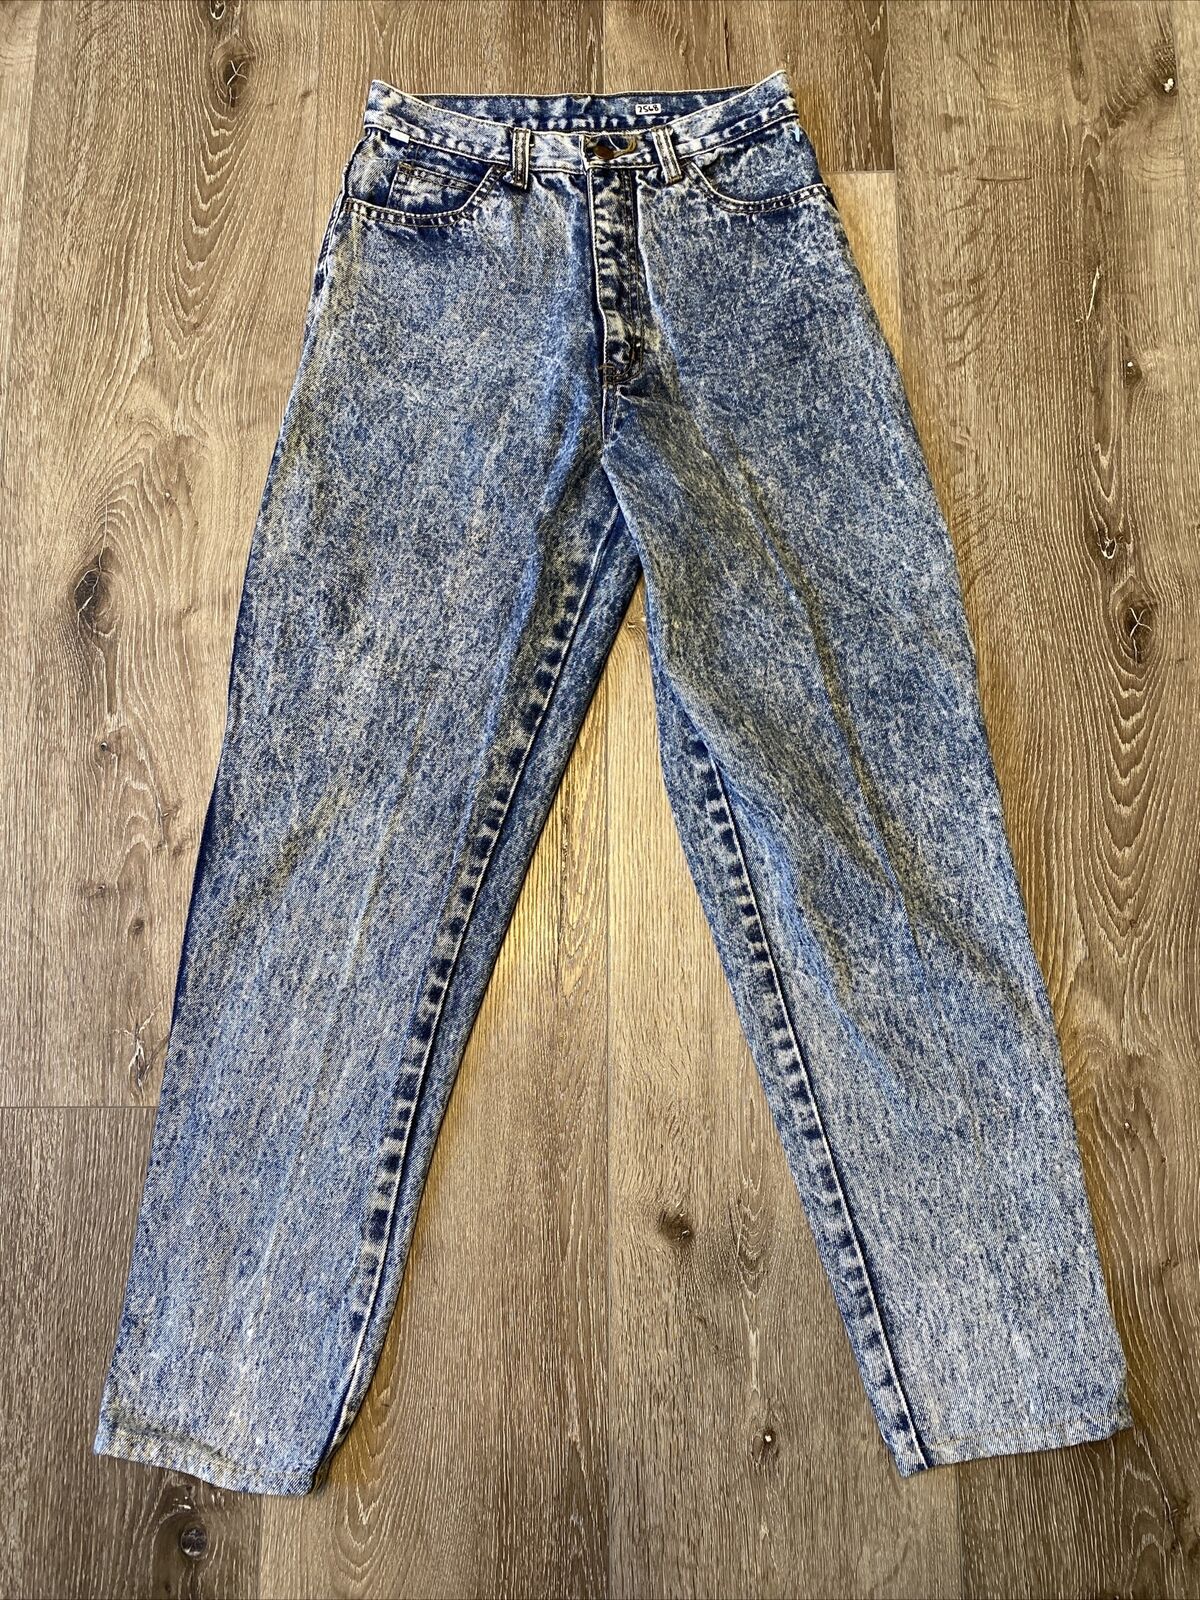 Fortune Car Jeans Womens 26x29 Stone Wash 